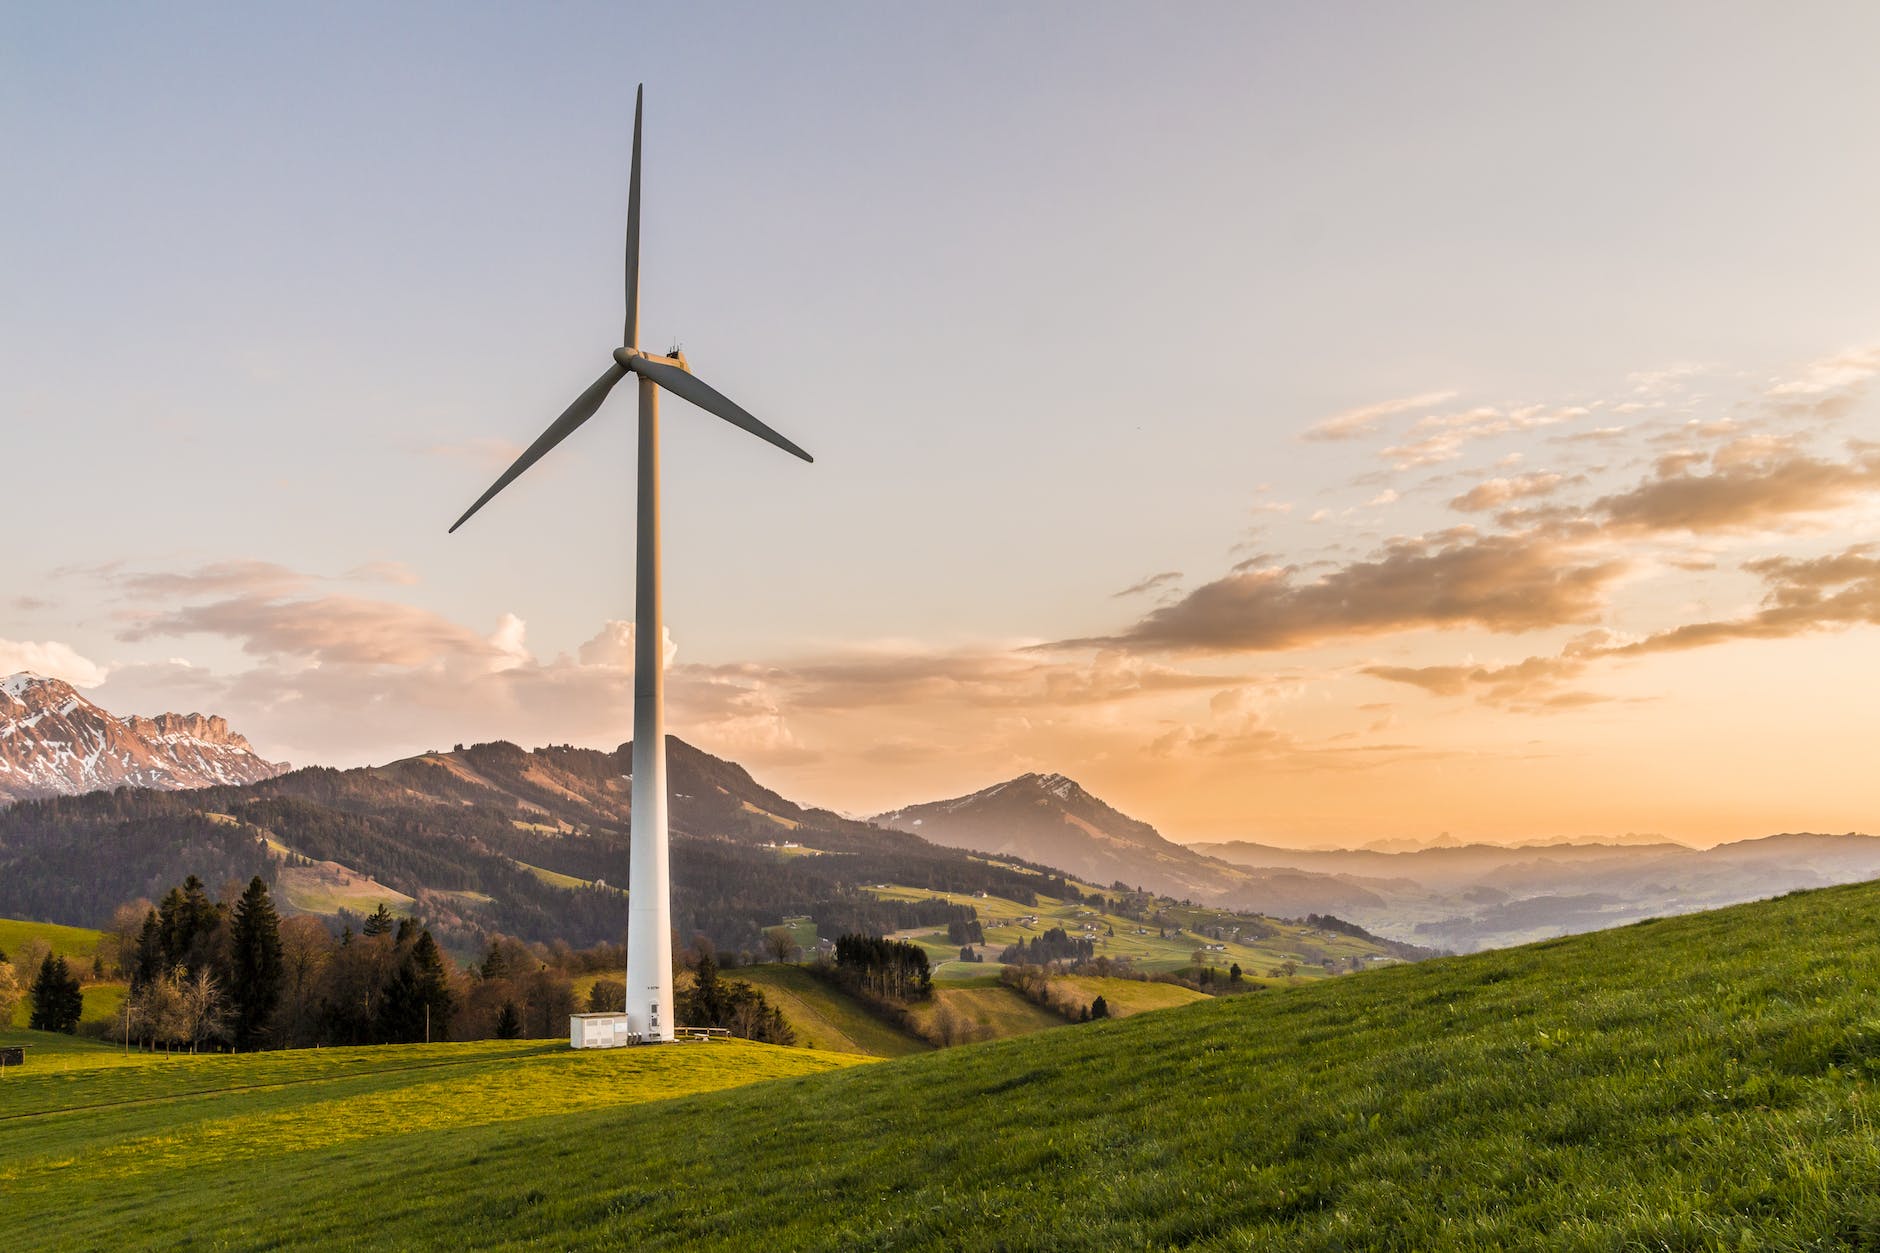 Sunset or dawn-time photo of a white wind turbine positioned in front of a mountainous landscape and green fields. 